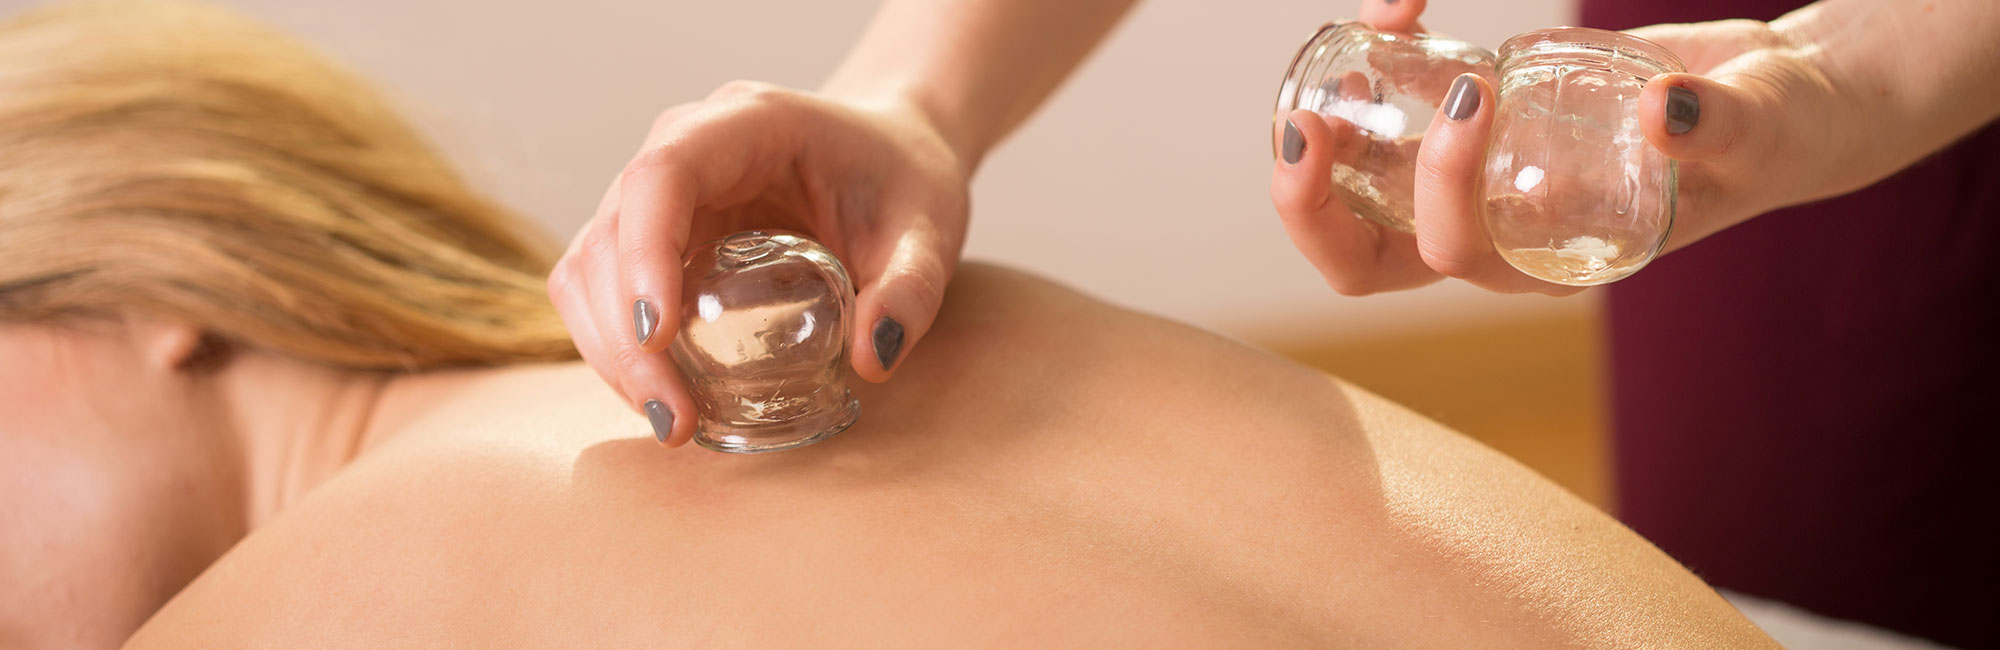 A women relaxing during our cupping massage services in Pasadena, CA.